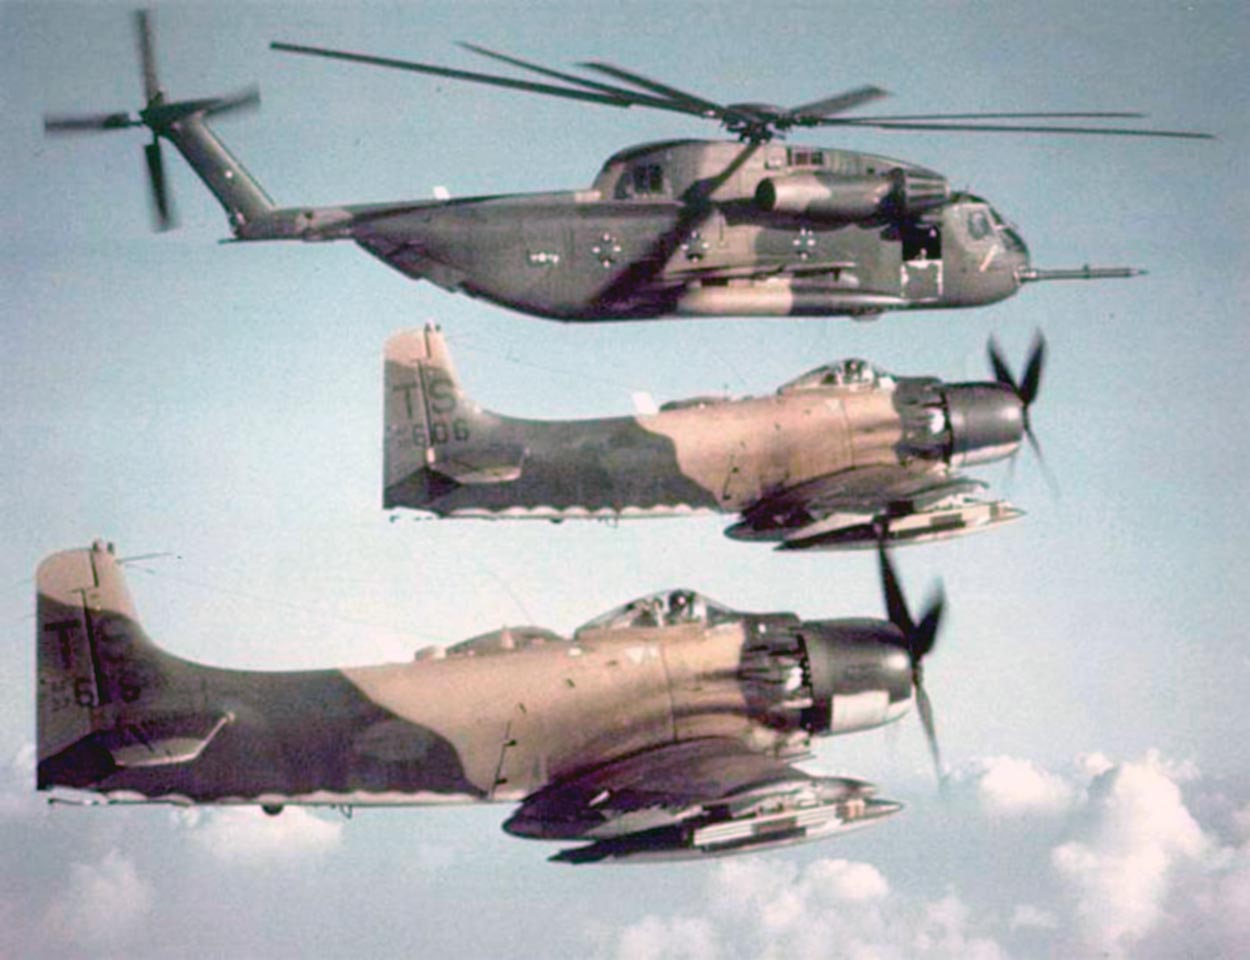 Five HH-53 Super Jolly Green Giant search and rescue helicopters, like the one shown at top in a formation with Air Force A-1 Skyraider attack aircraft, participated in the assault at Son Tay. 